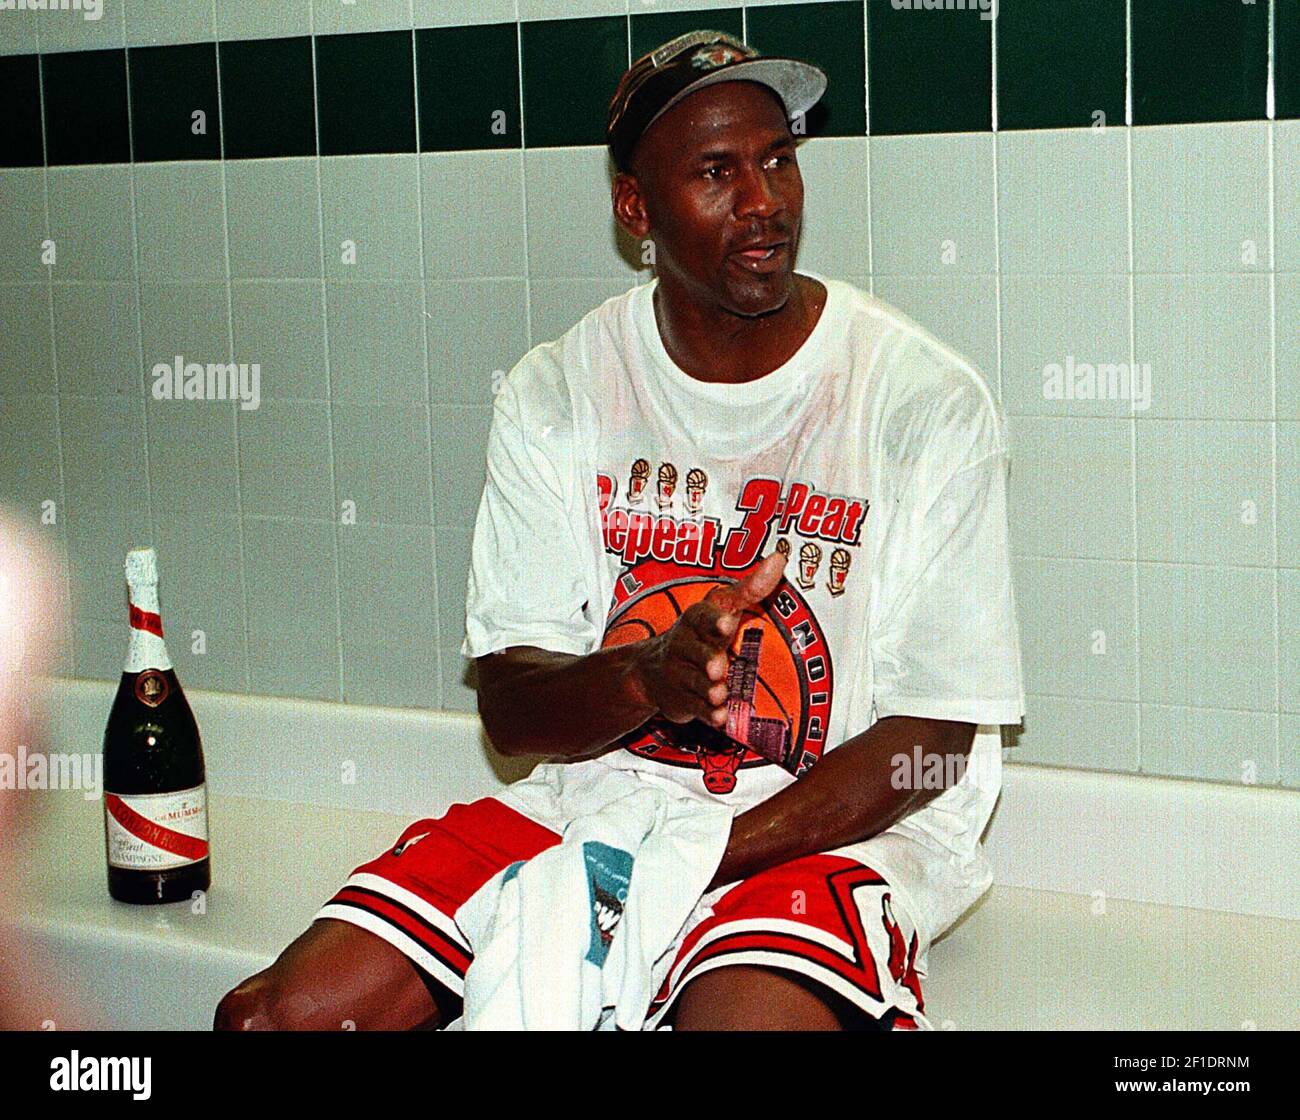 Teenage Michael Jordan 'Cried In His Room' After One Of His